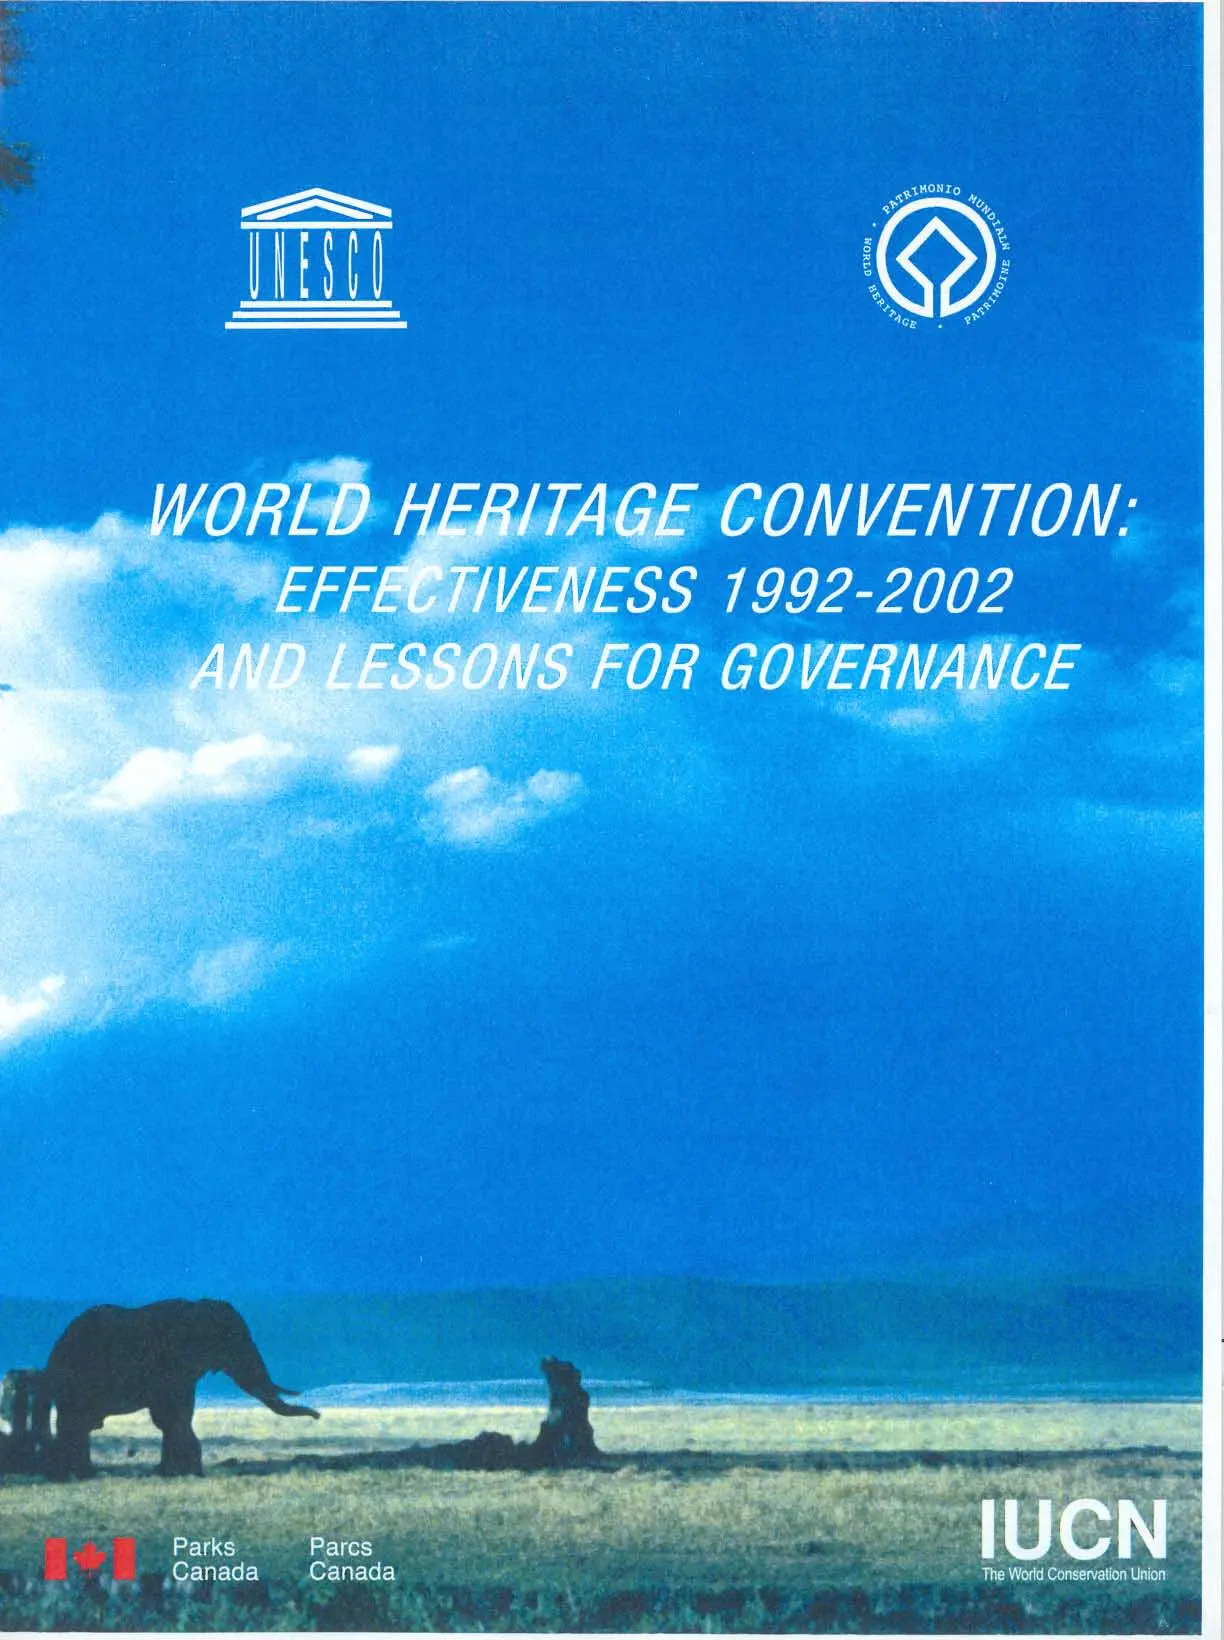 World Heritage Convention: Effectiveness 1992-2002 and Lessons for Governance